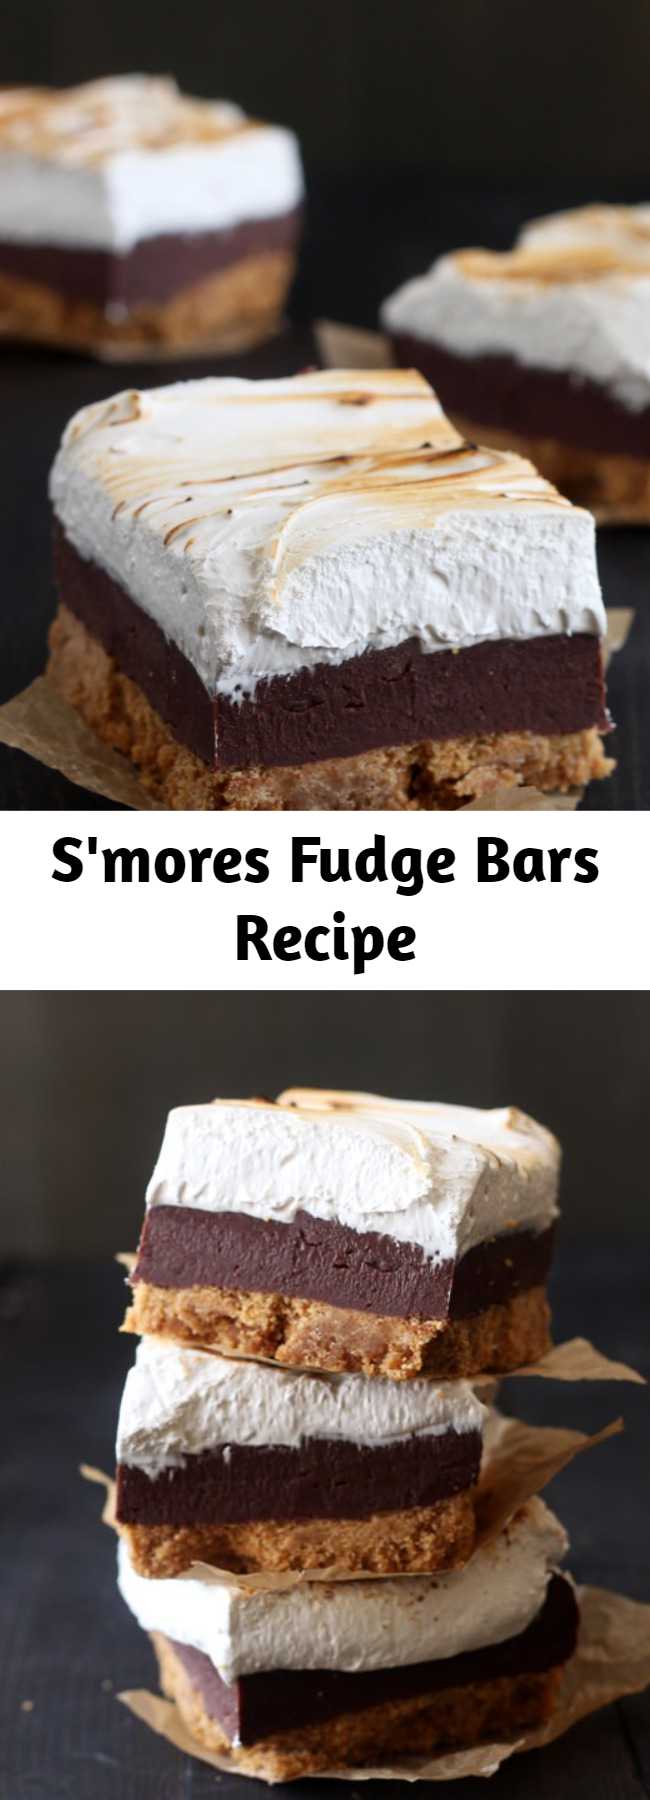 S'mores Fudge Bars have a thick layer of buttery graham cracker crust, fudgy chocolate filling, and a homemade toasted marshmallow topping. Incredible!